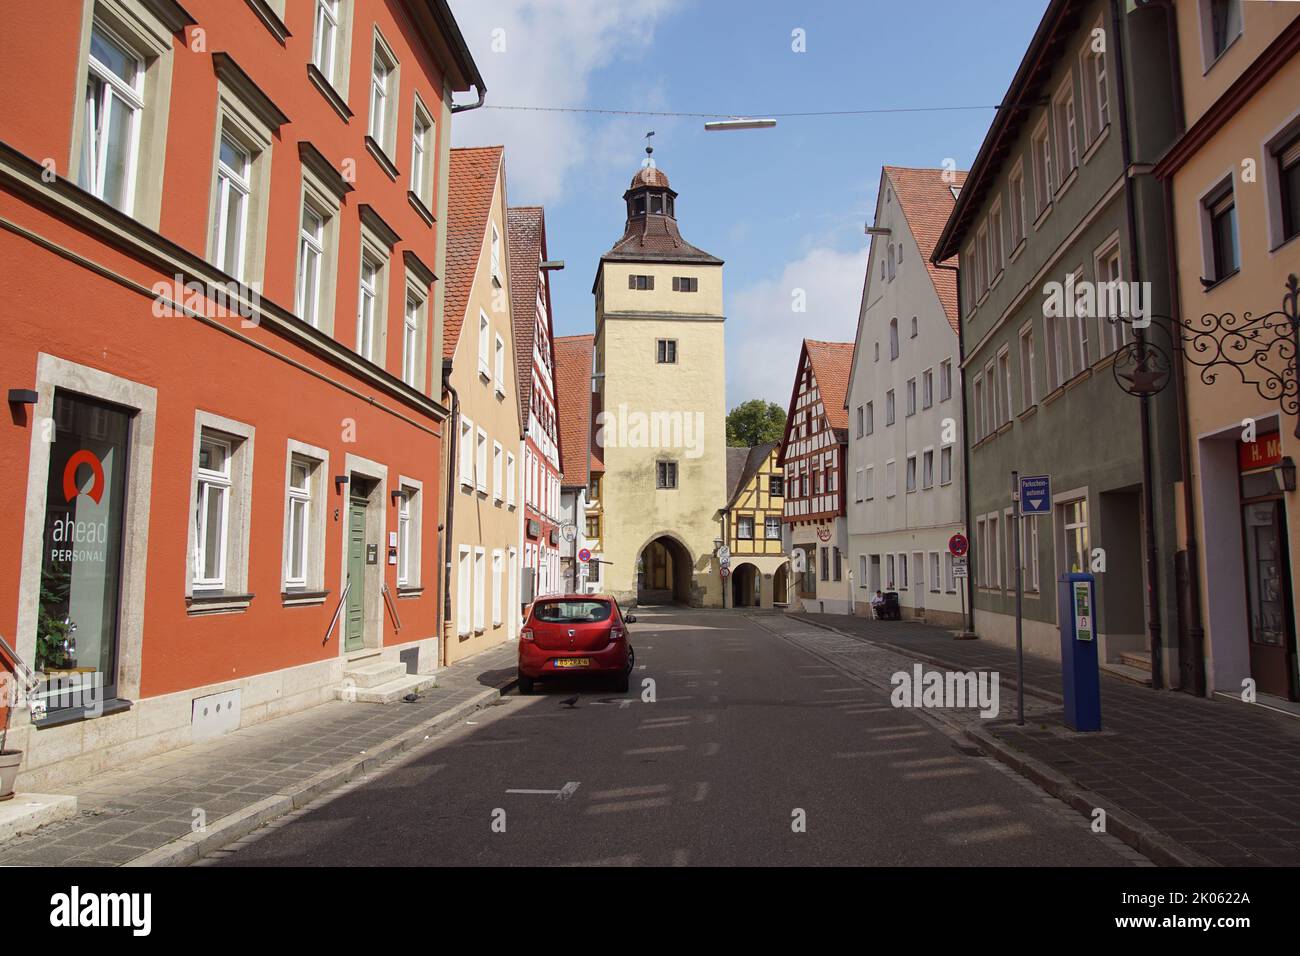 Ellinger Tor, the medieval city gate in the German city of Weißenburg. Street, half-timbered houses. Summer. August. Stock Photo